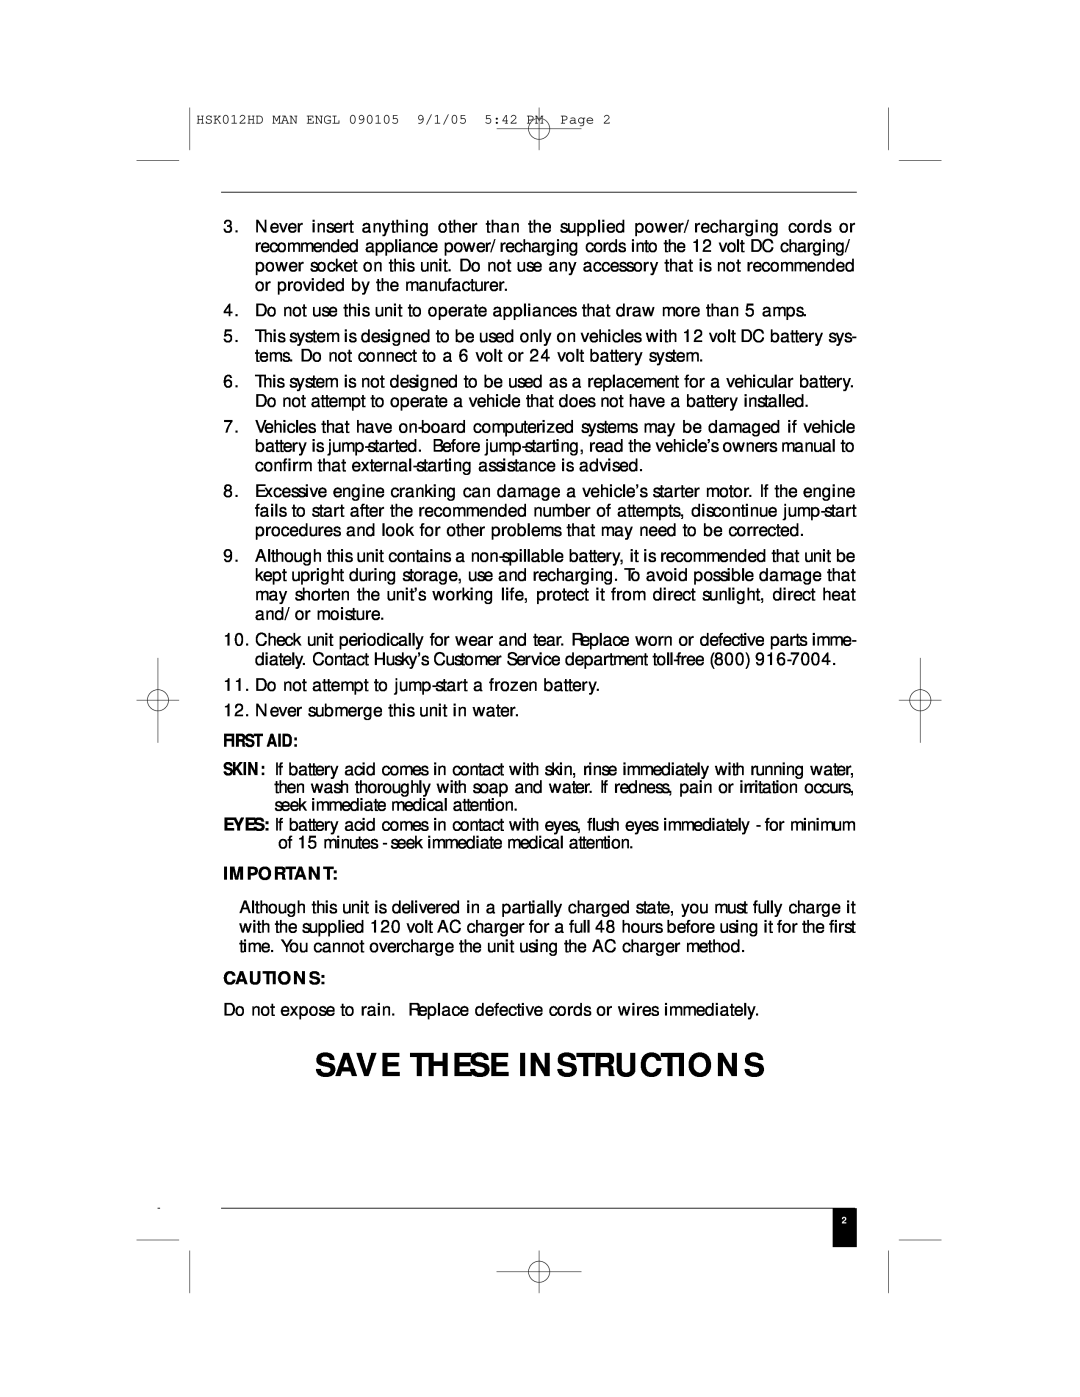 Husky HSK012HD manual First Aid, Save These Instructions, Cautions 